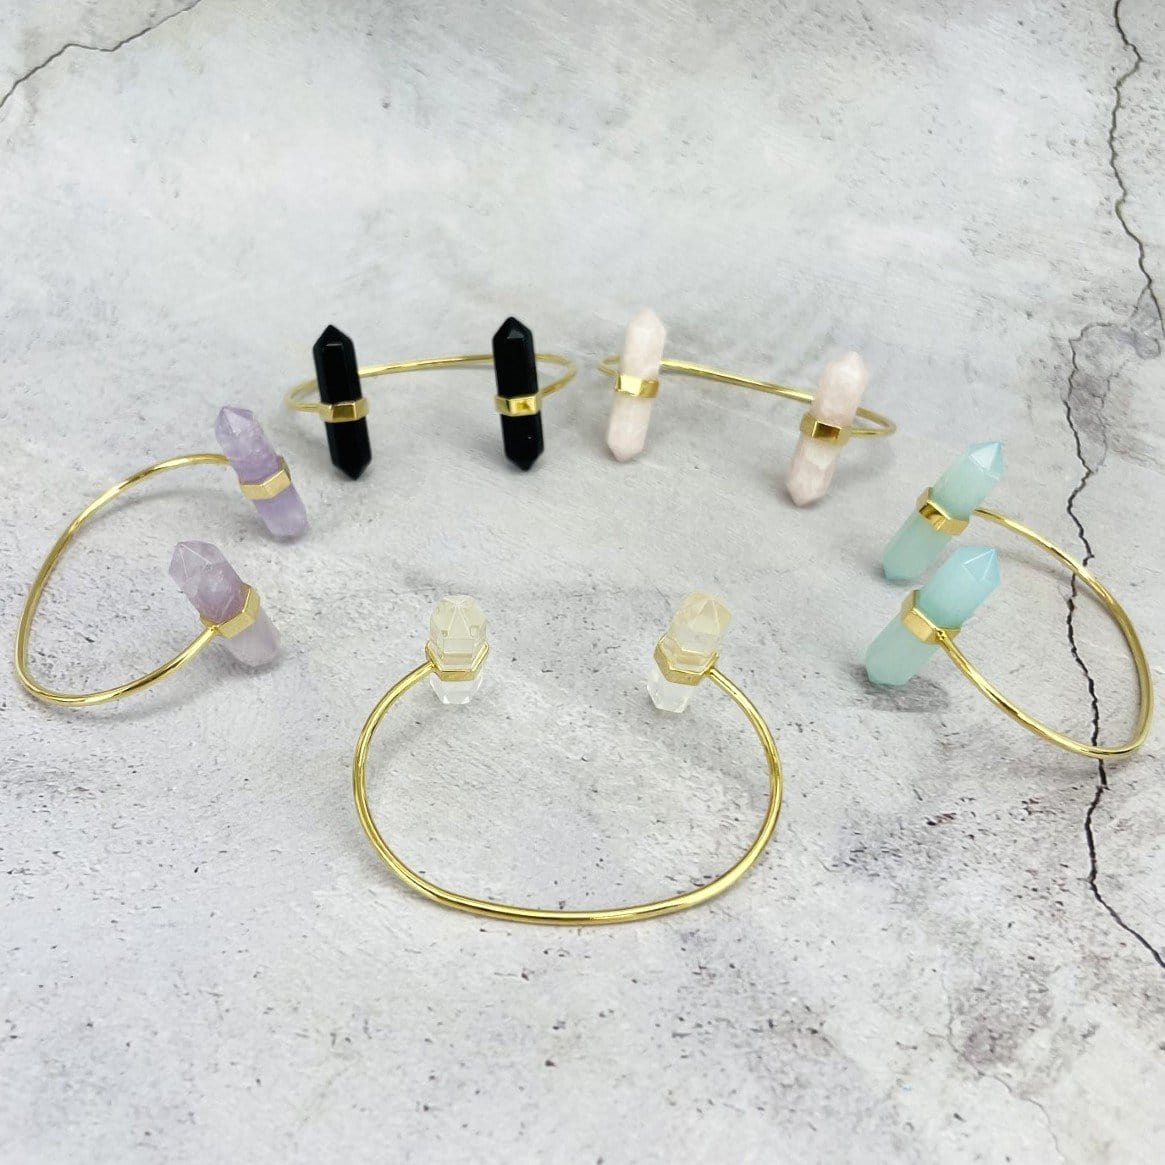 5 gold Crystal Point Cuffs in various crystals